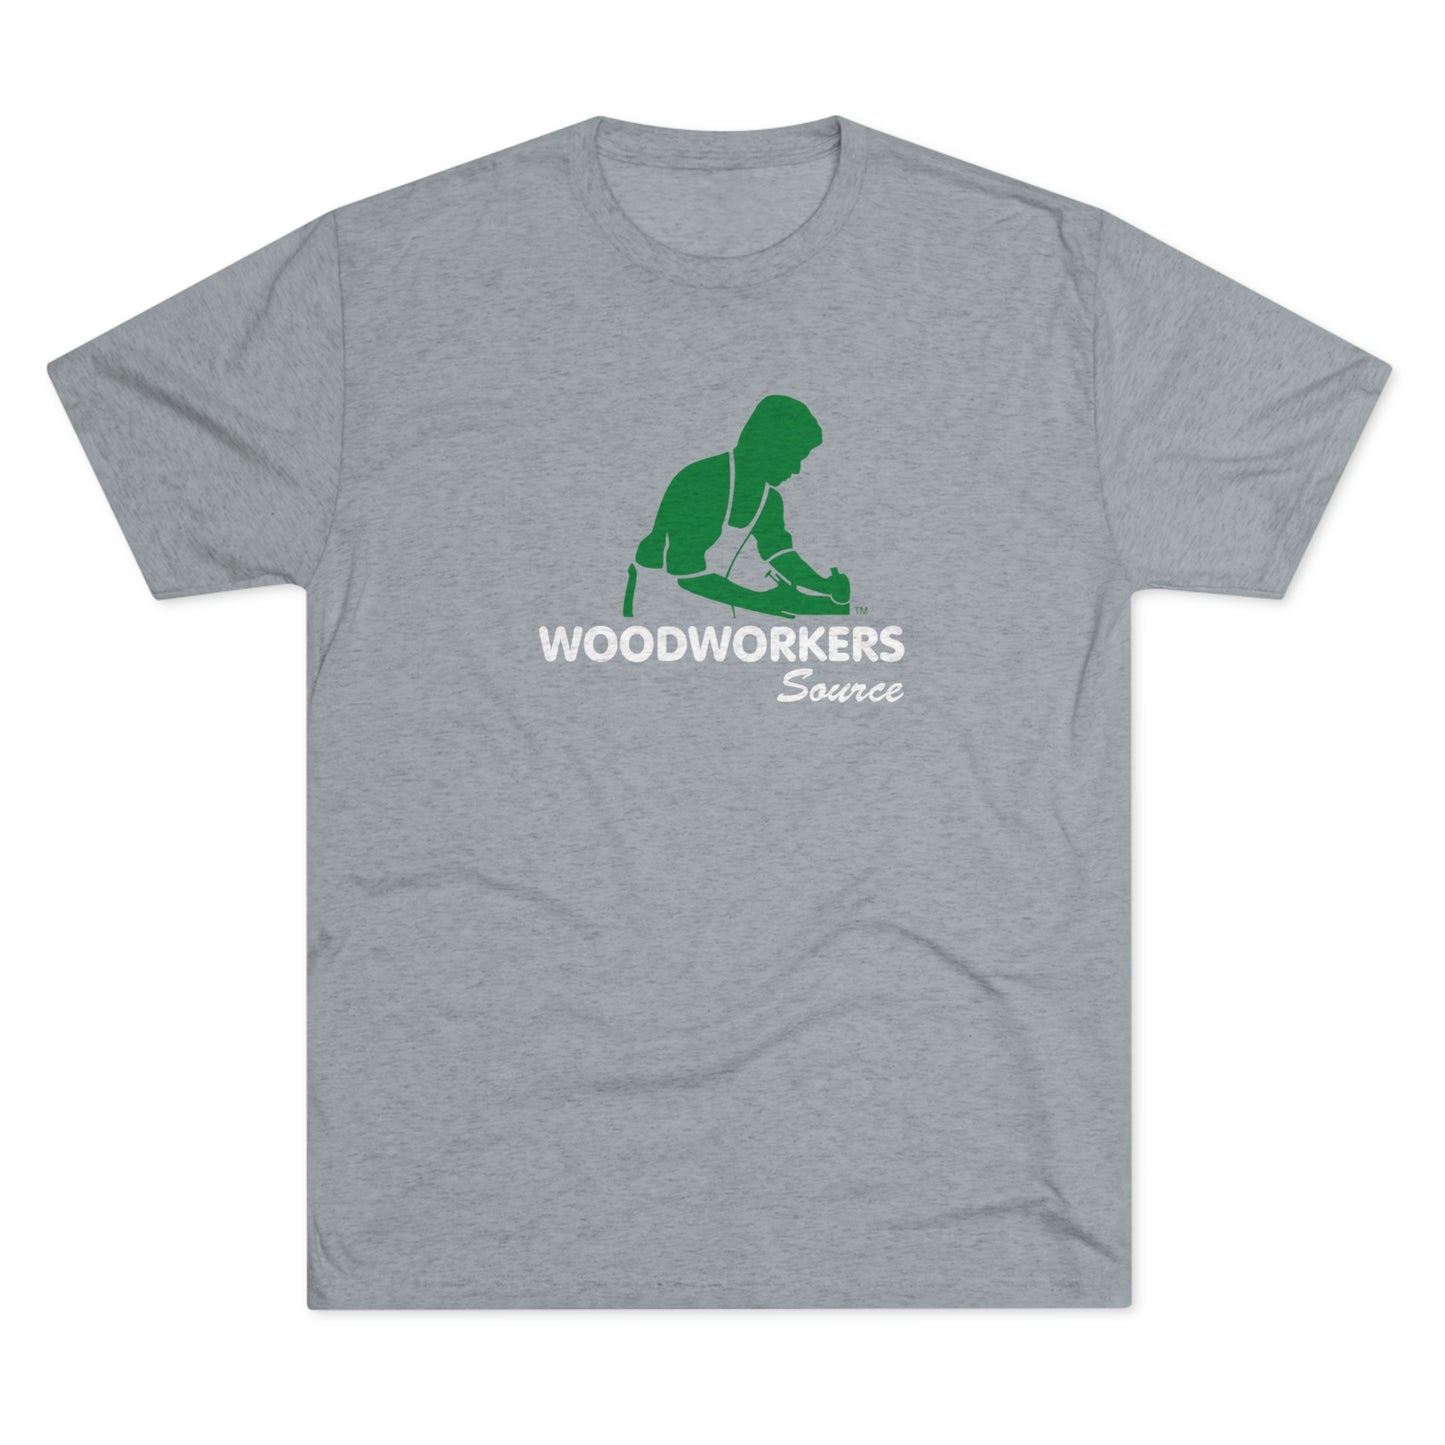 Woodworkers Source Soft Tri-Blend Crew Tee - Front Logo